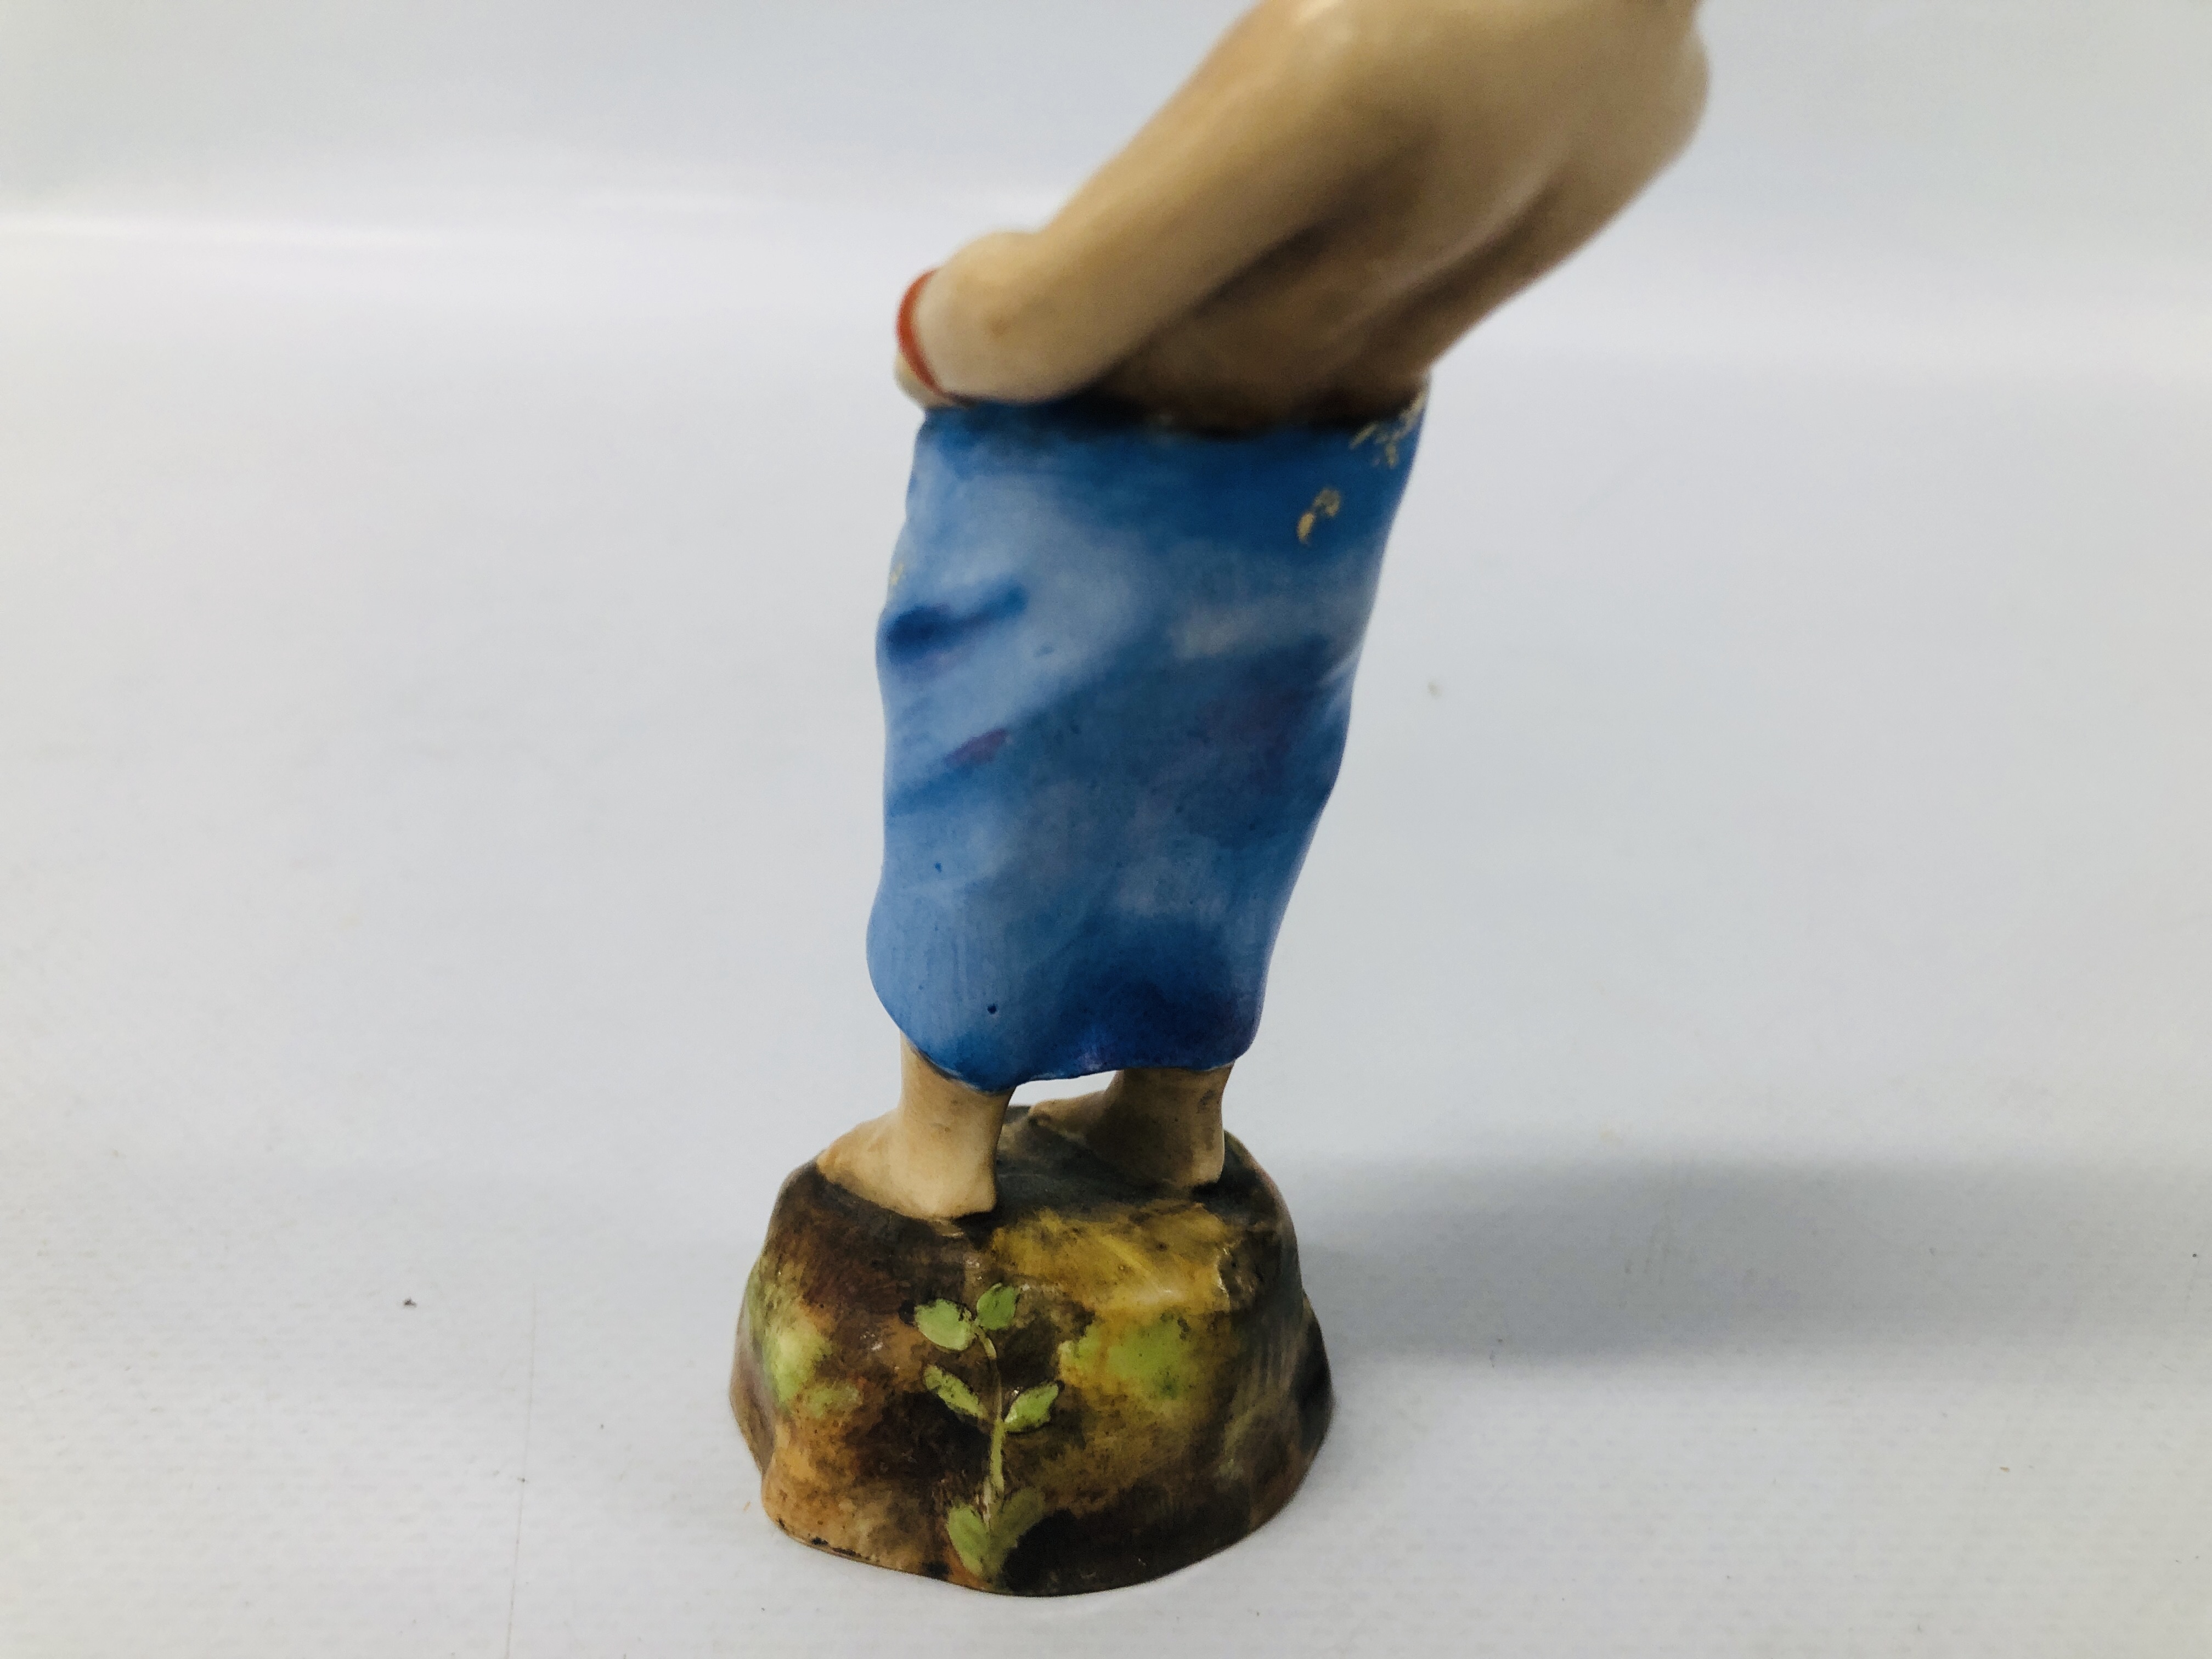 A ROYAL WORCESTER FIGURE "BURMAH 3068" BY F. DOUGHTY, H 12CM. - Image 6 of 10